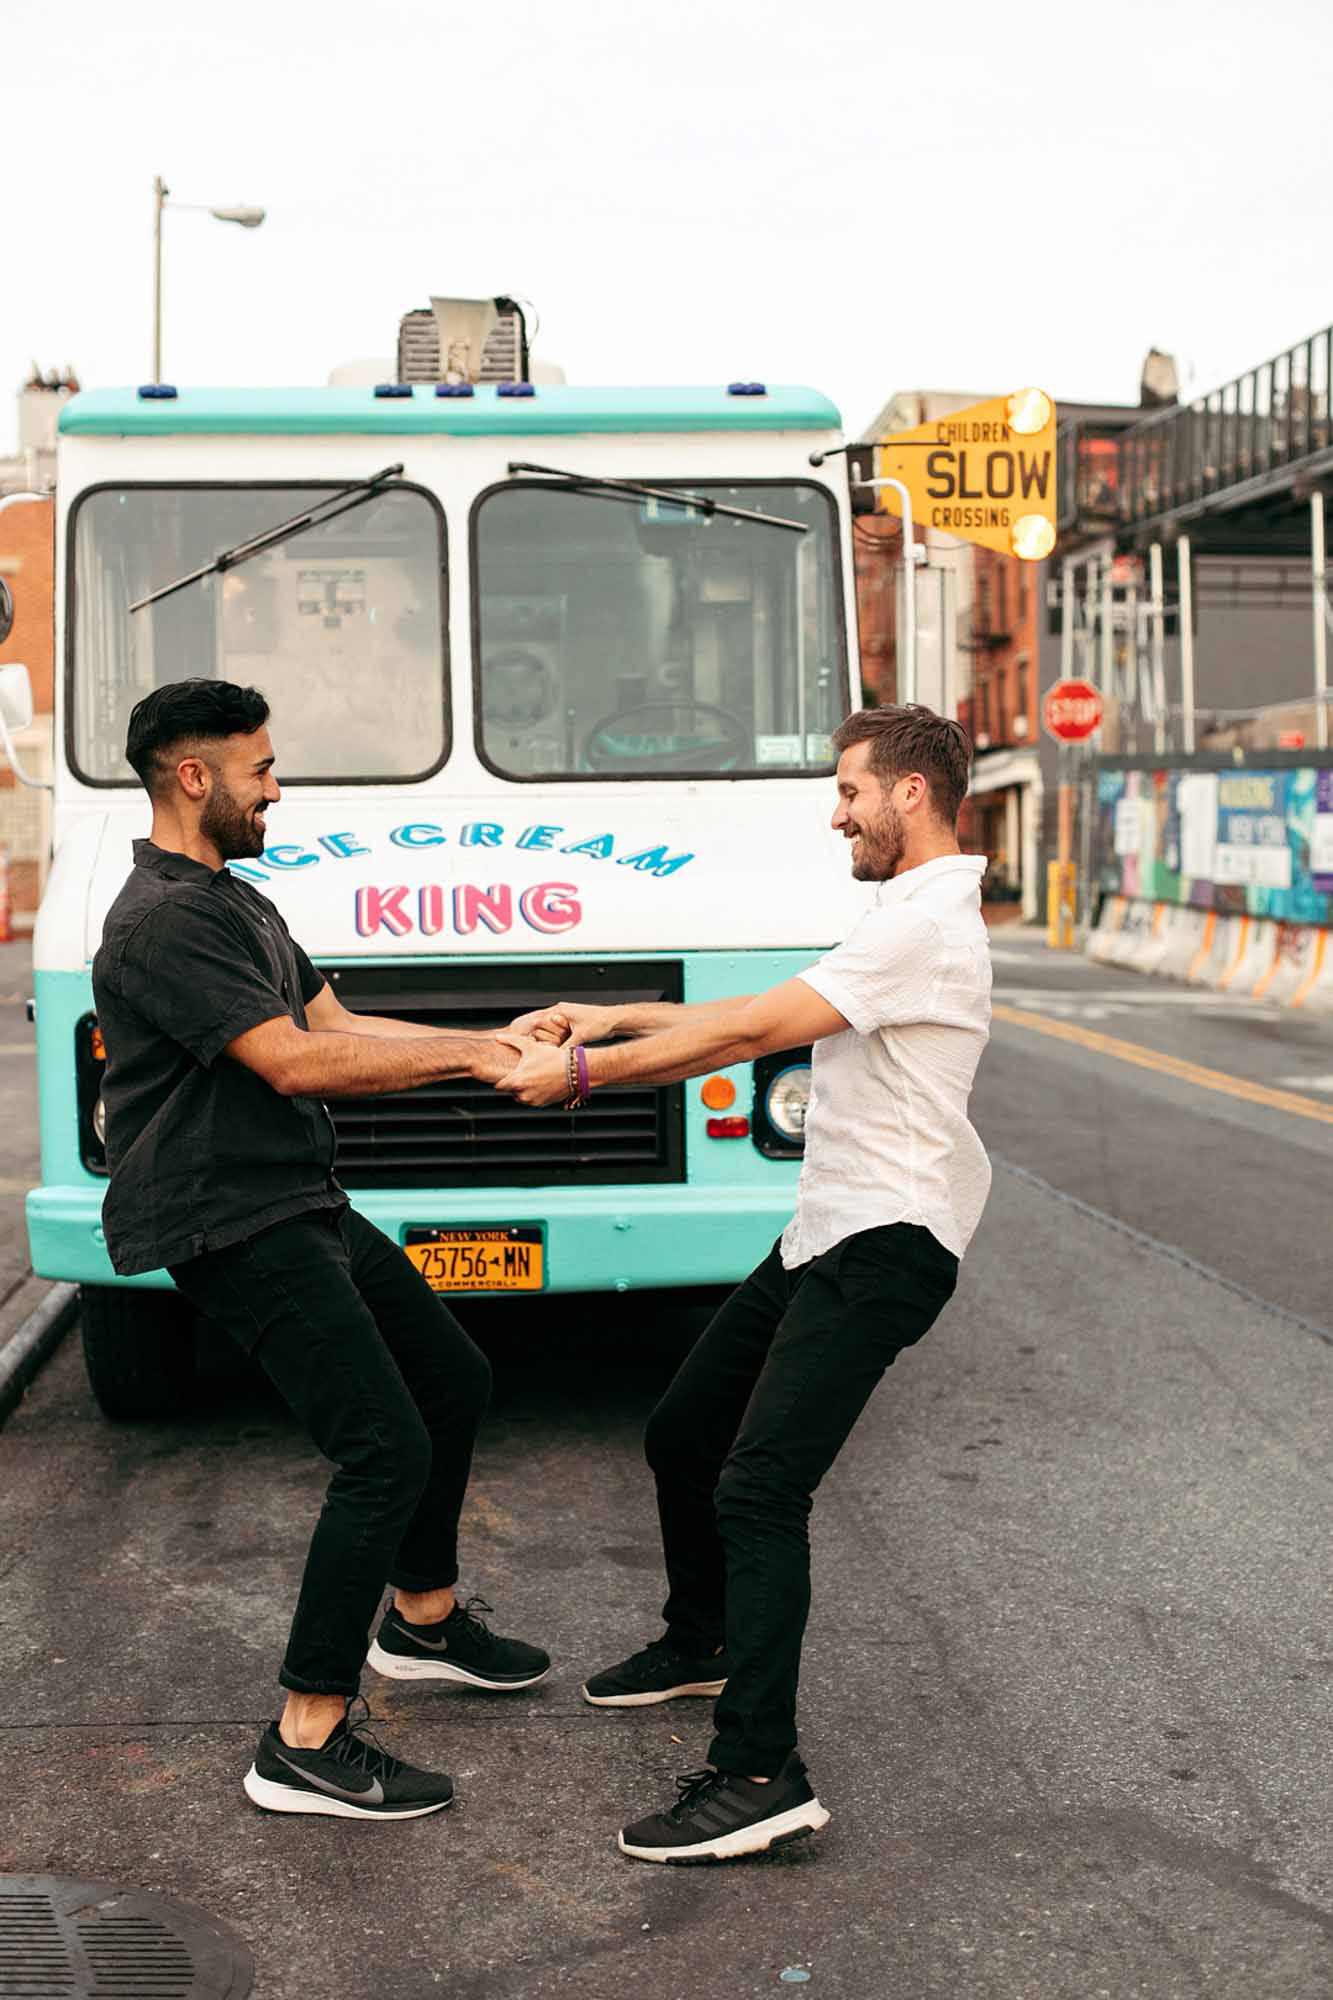 Charming urban engagement session in Brooklyn's Domino Park | Bailey Q Photo | Featured on Equally Wed, the leading LGBTQ+ wedding magazine